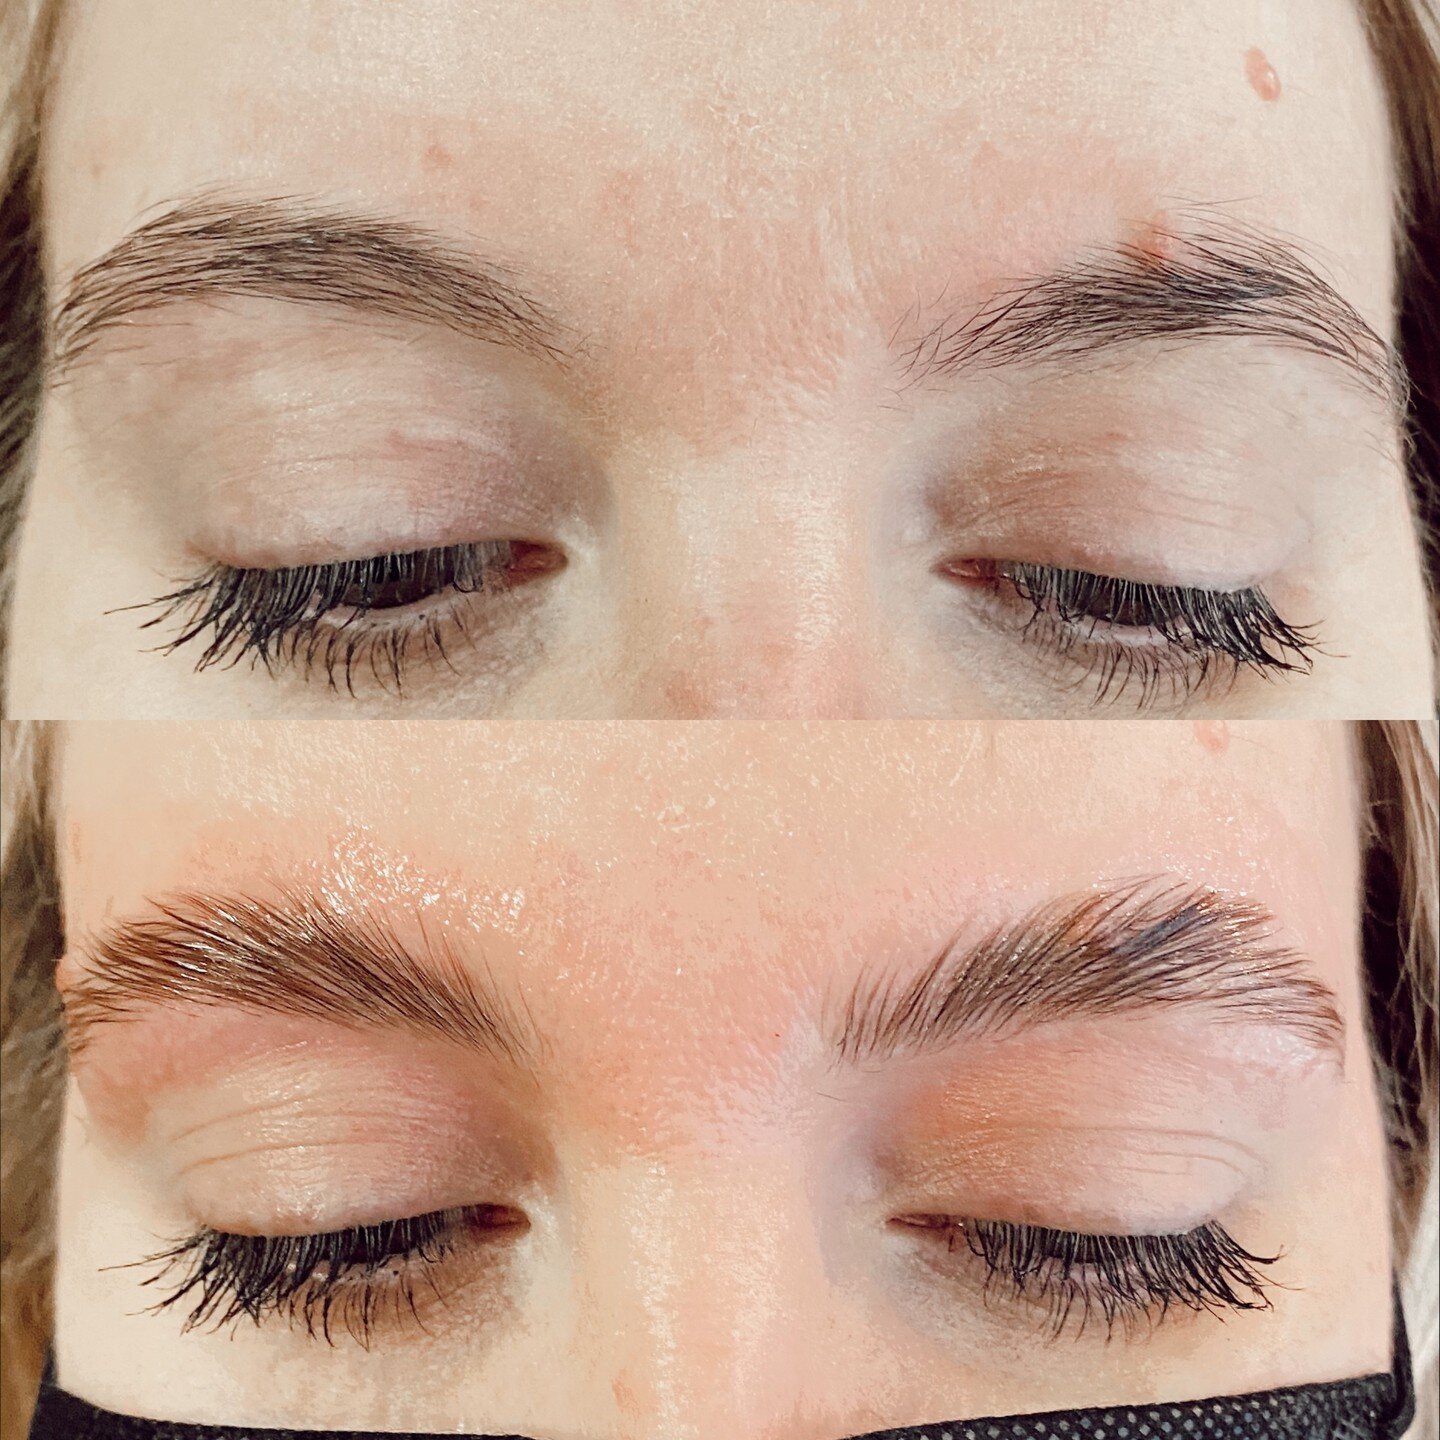 When you've got full brows but feel like they just won't do what you want, it's definitely time to Laminate! Brow Lamination is a keratin infused treatment that tames and shapes unruly brows. It strengthens each brow hair adding thickness, volume and